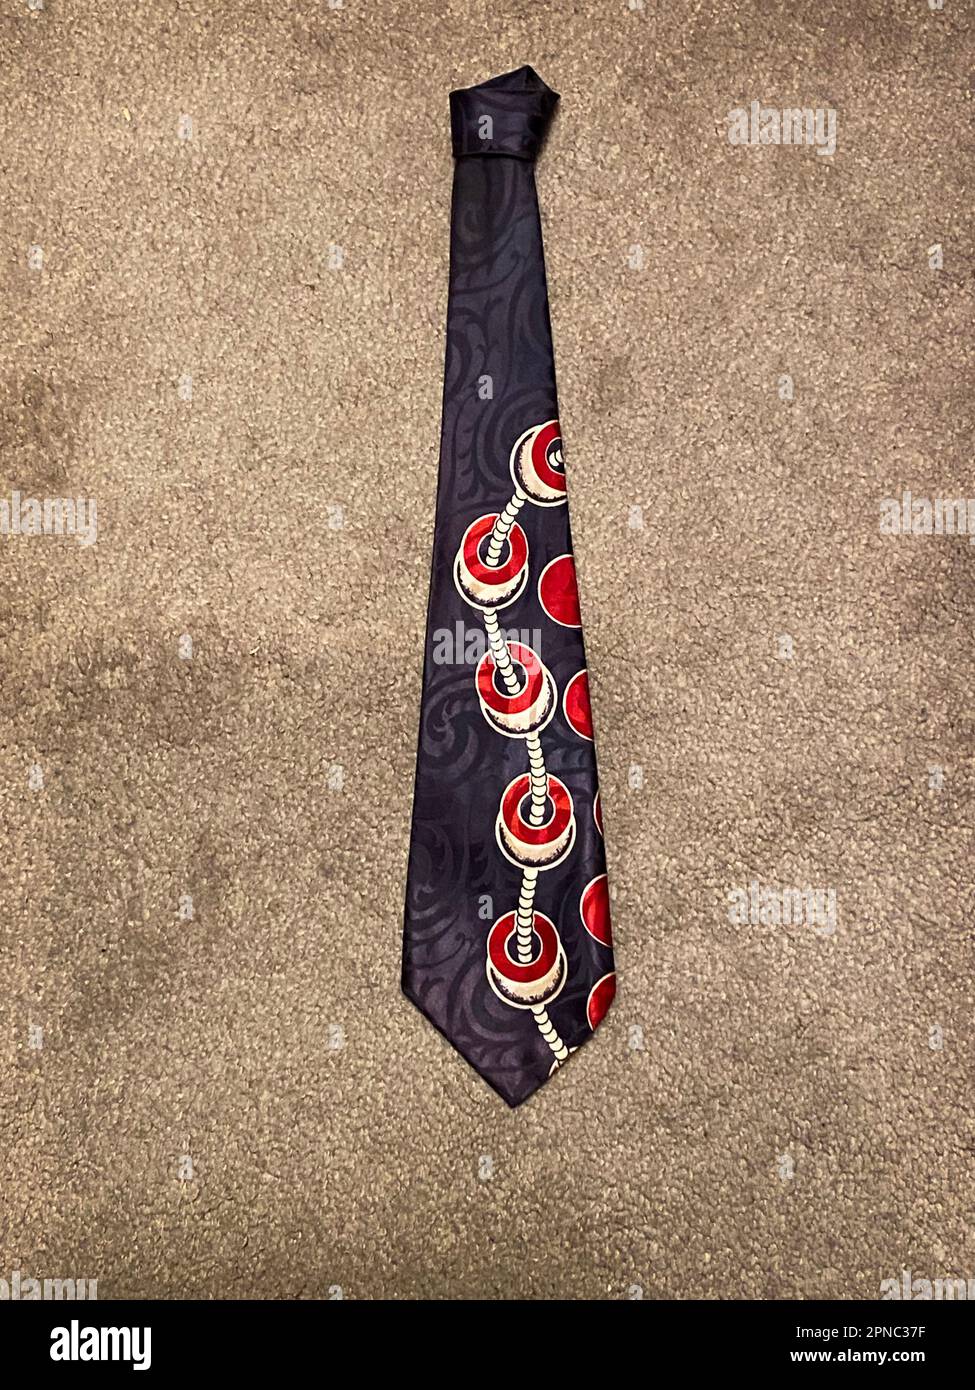 Still life of a beautiful blue art deco era necktie likely from the 1940s. The label says Kreway. Stock Photo